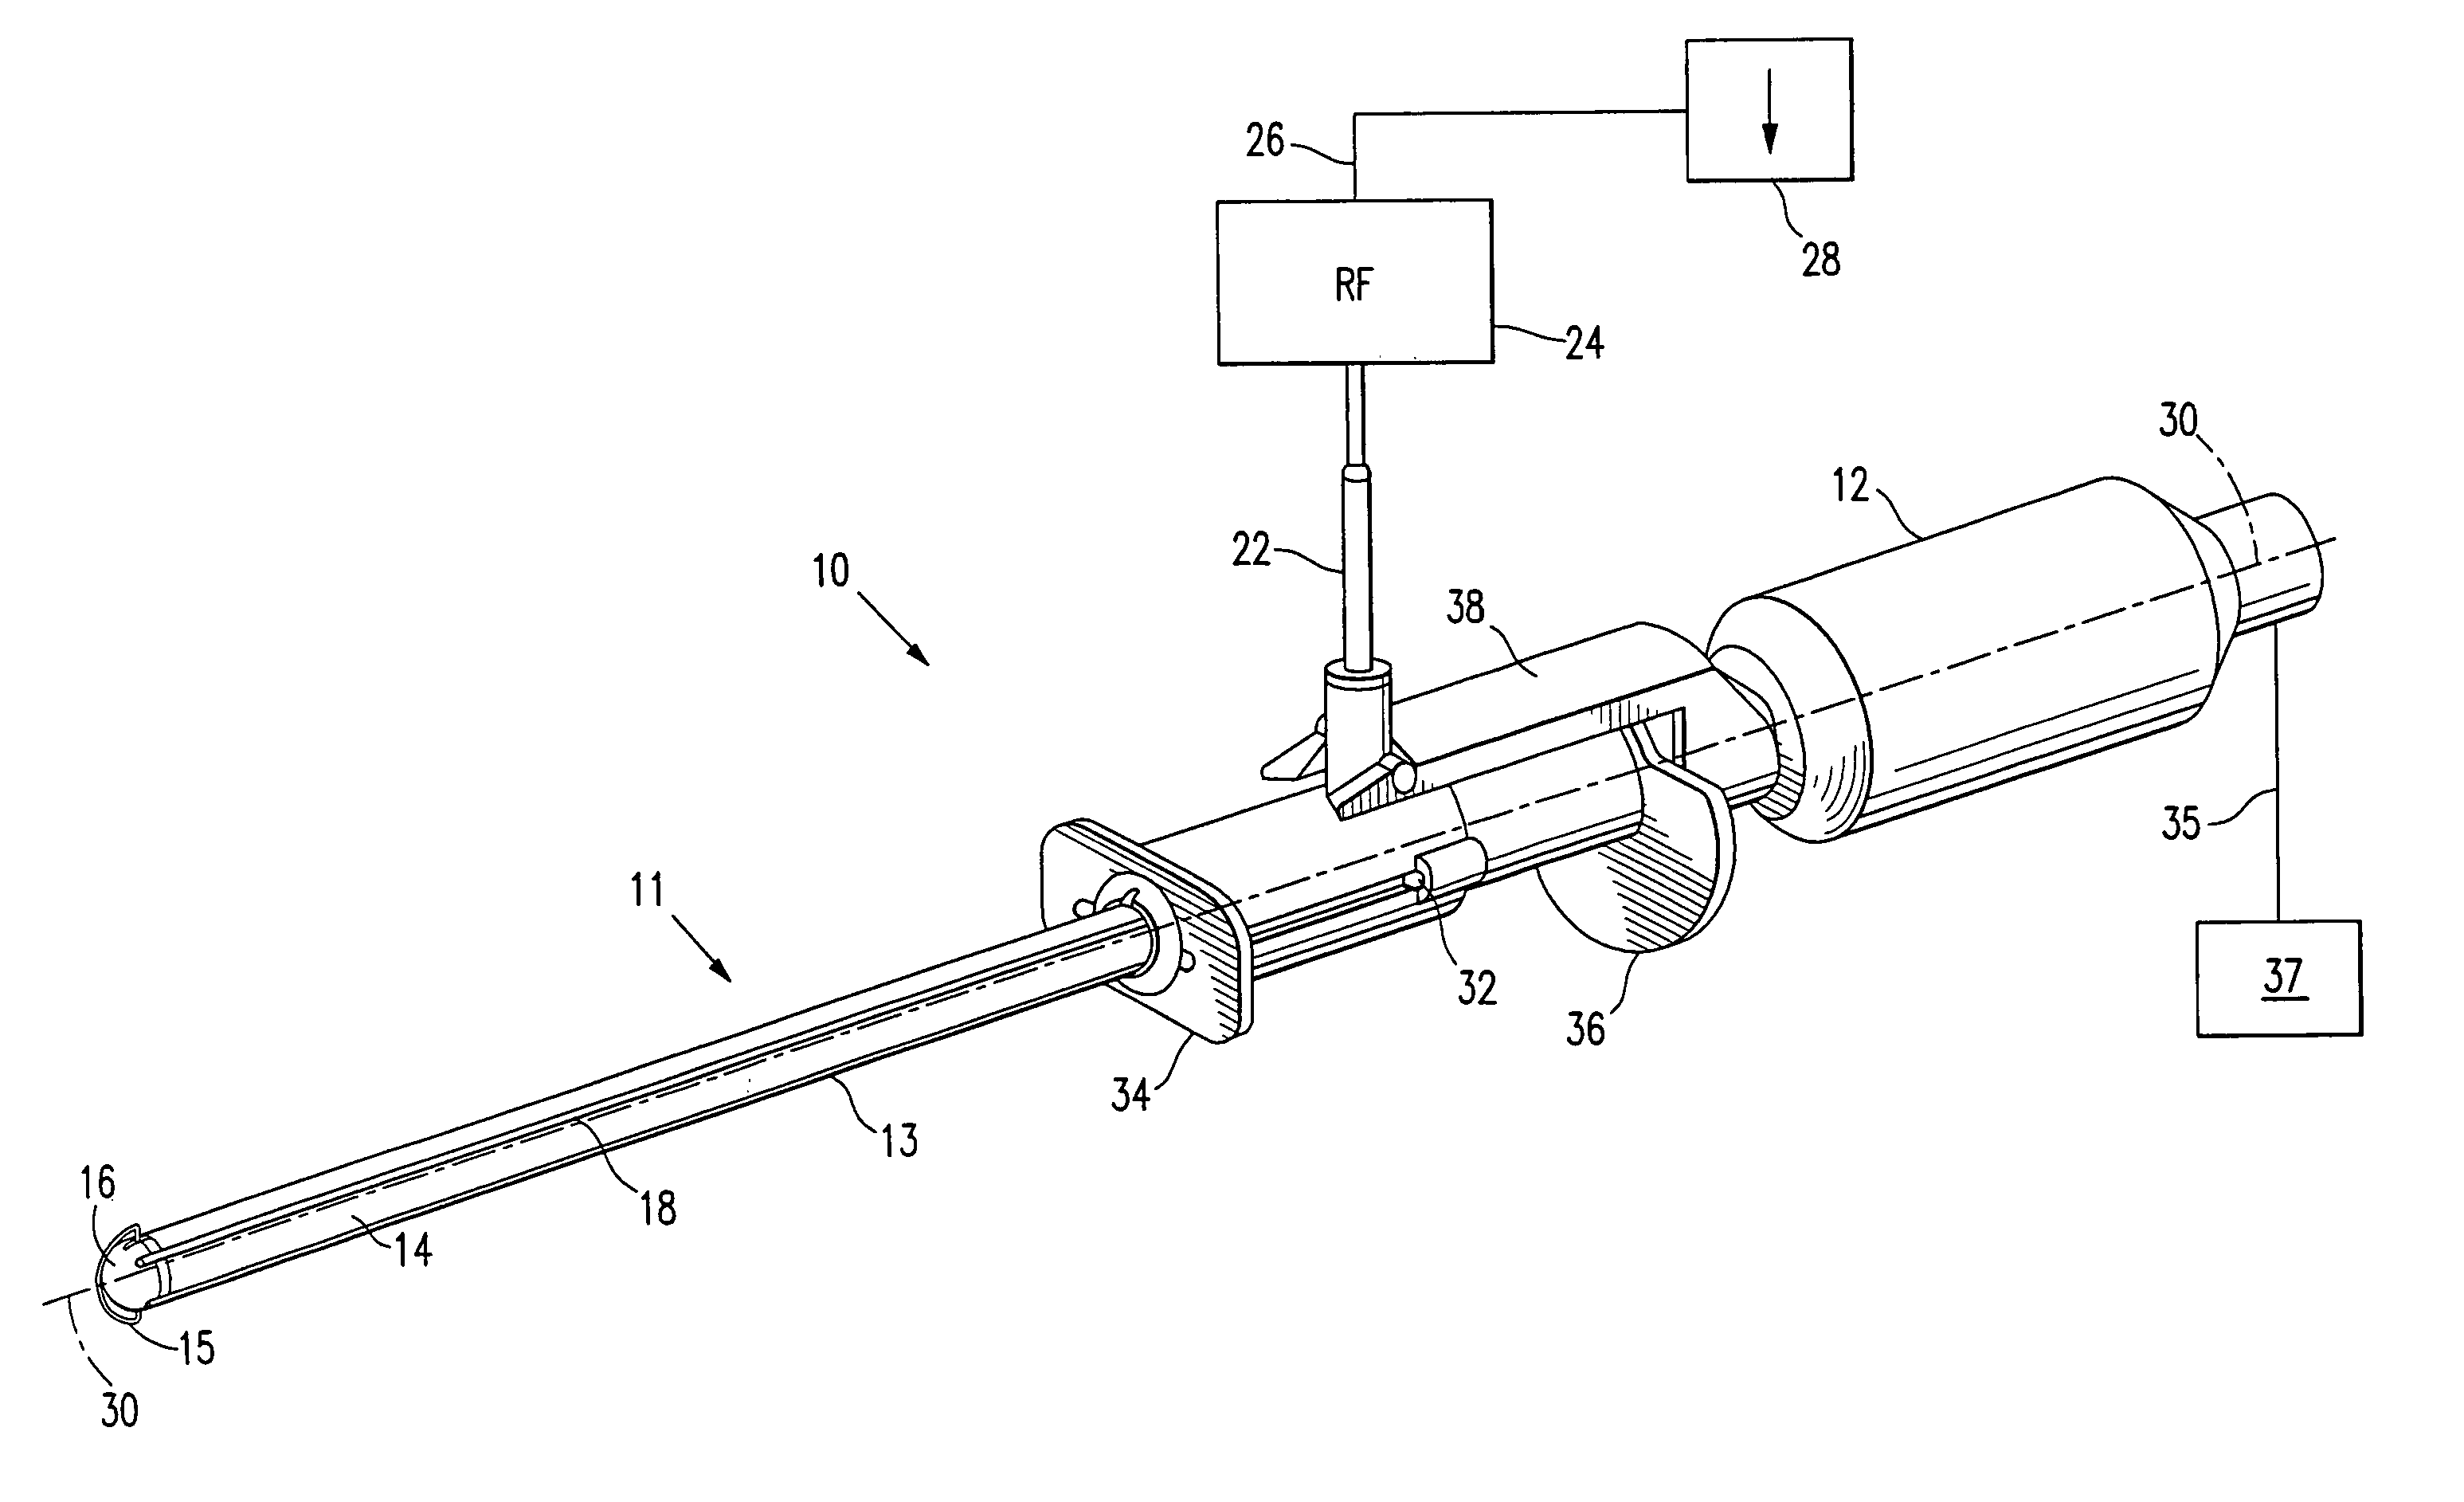 Tissue accessing and anchoring device and method